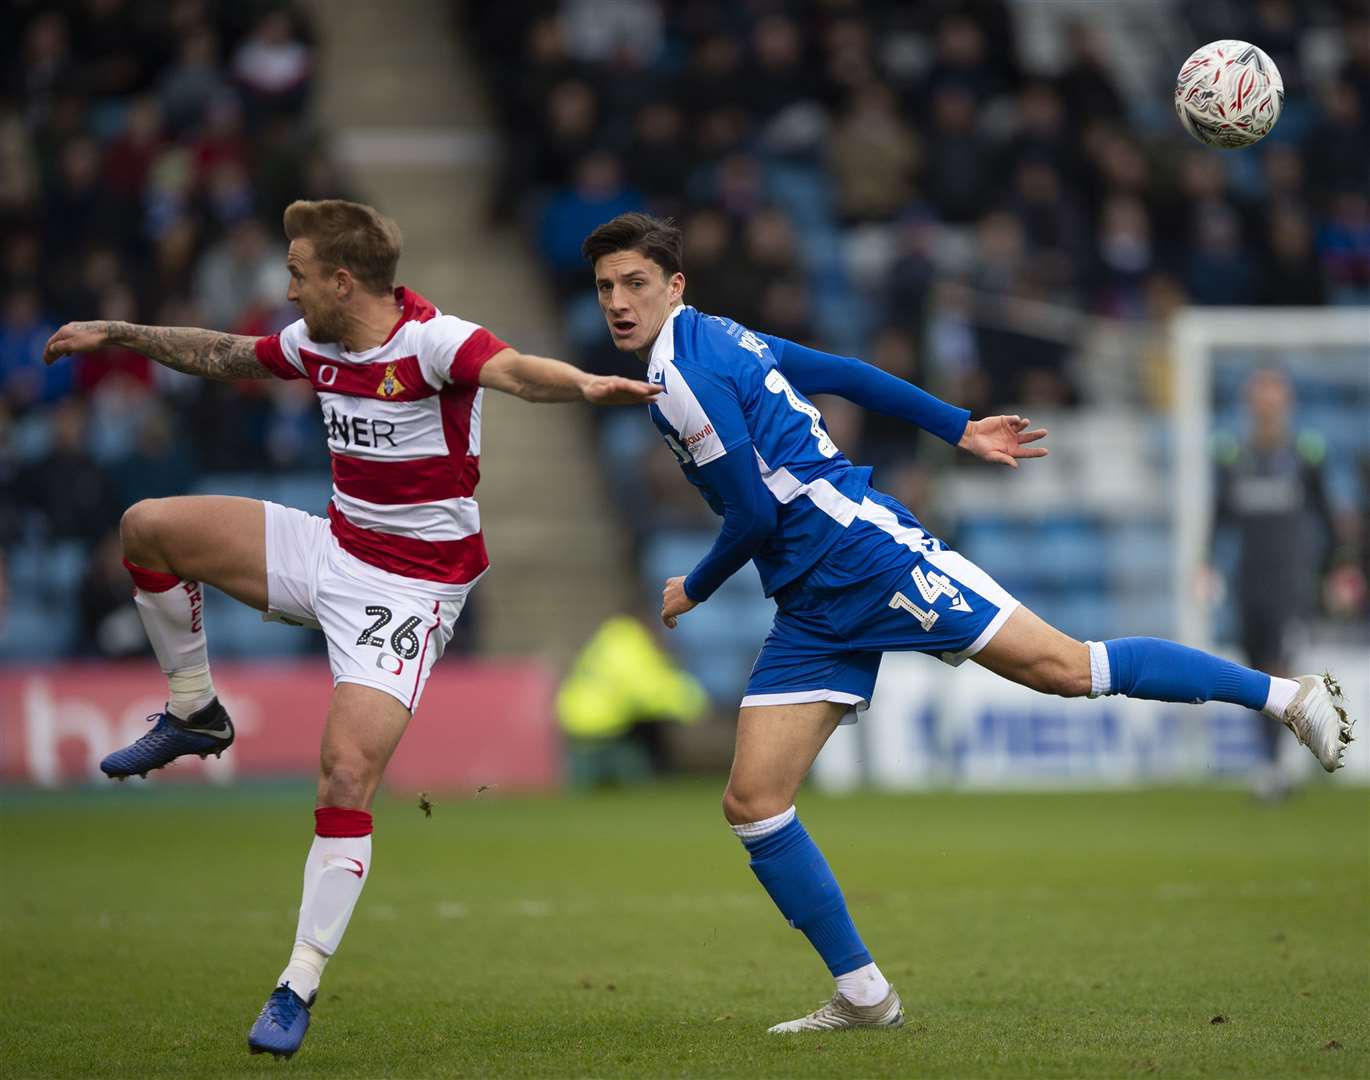 Alfie Jones is on a season-long deal from Southampton and is enjoying life in the Gills' first team